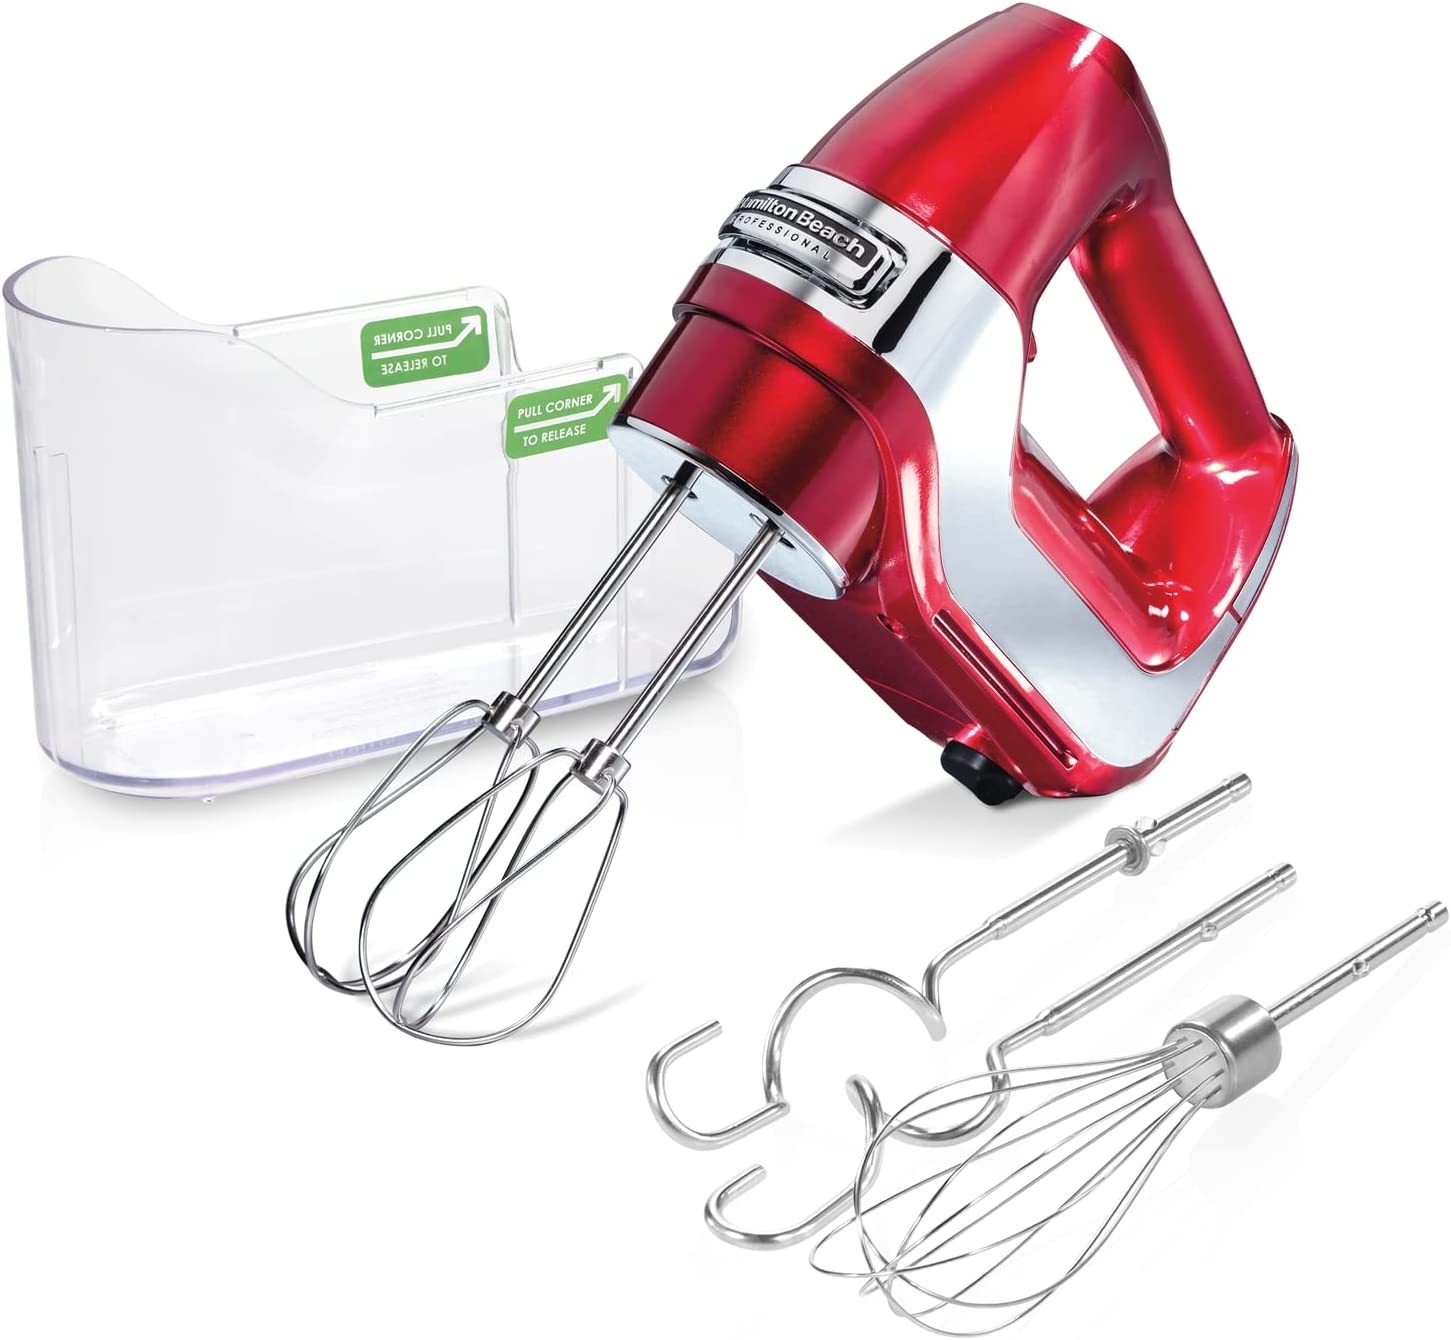 Hamilton Beach Professional 5-Speed Electric Hand Mixer with High-Performance DC Motor, Slow Start, Snap-On Storage Case,